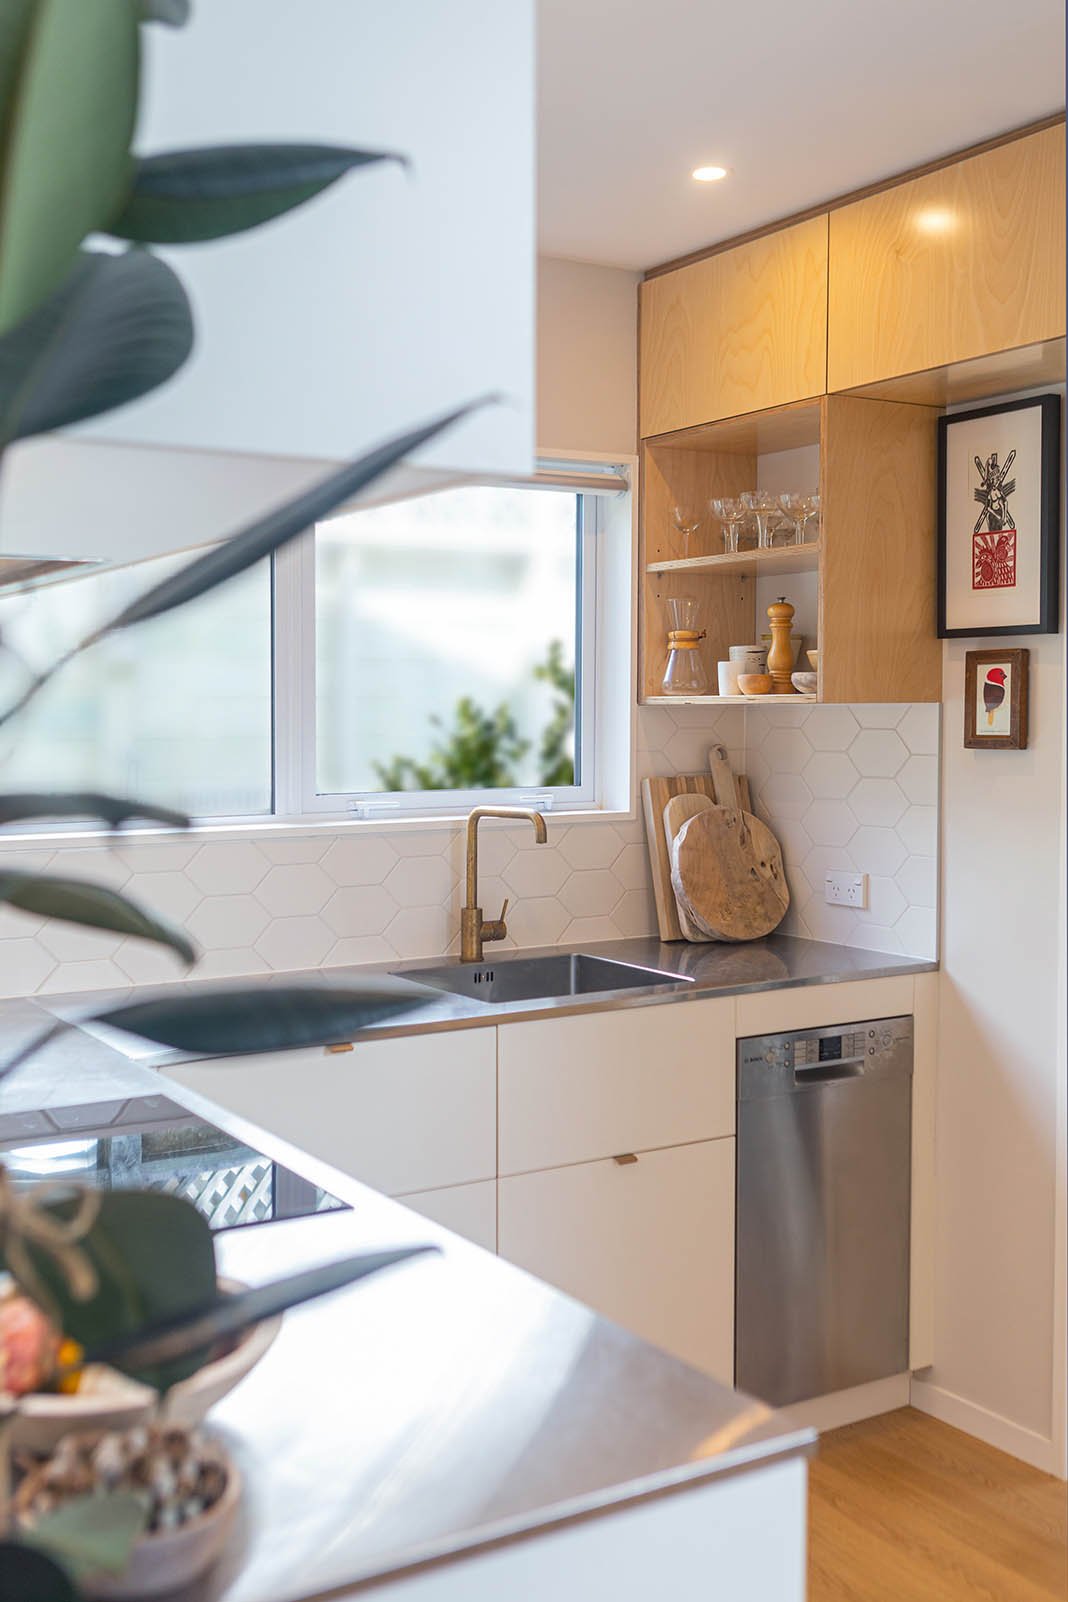 Tidy Compact Spaces - Kitchen